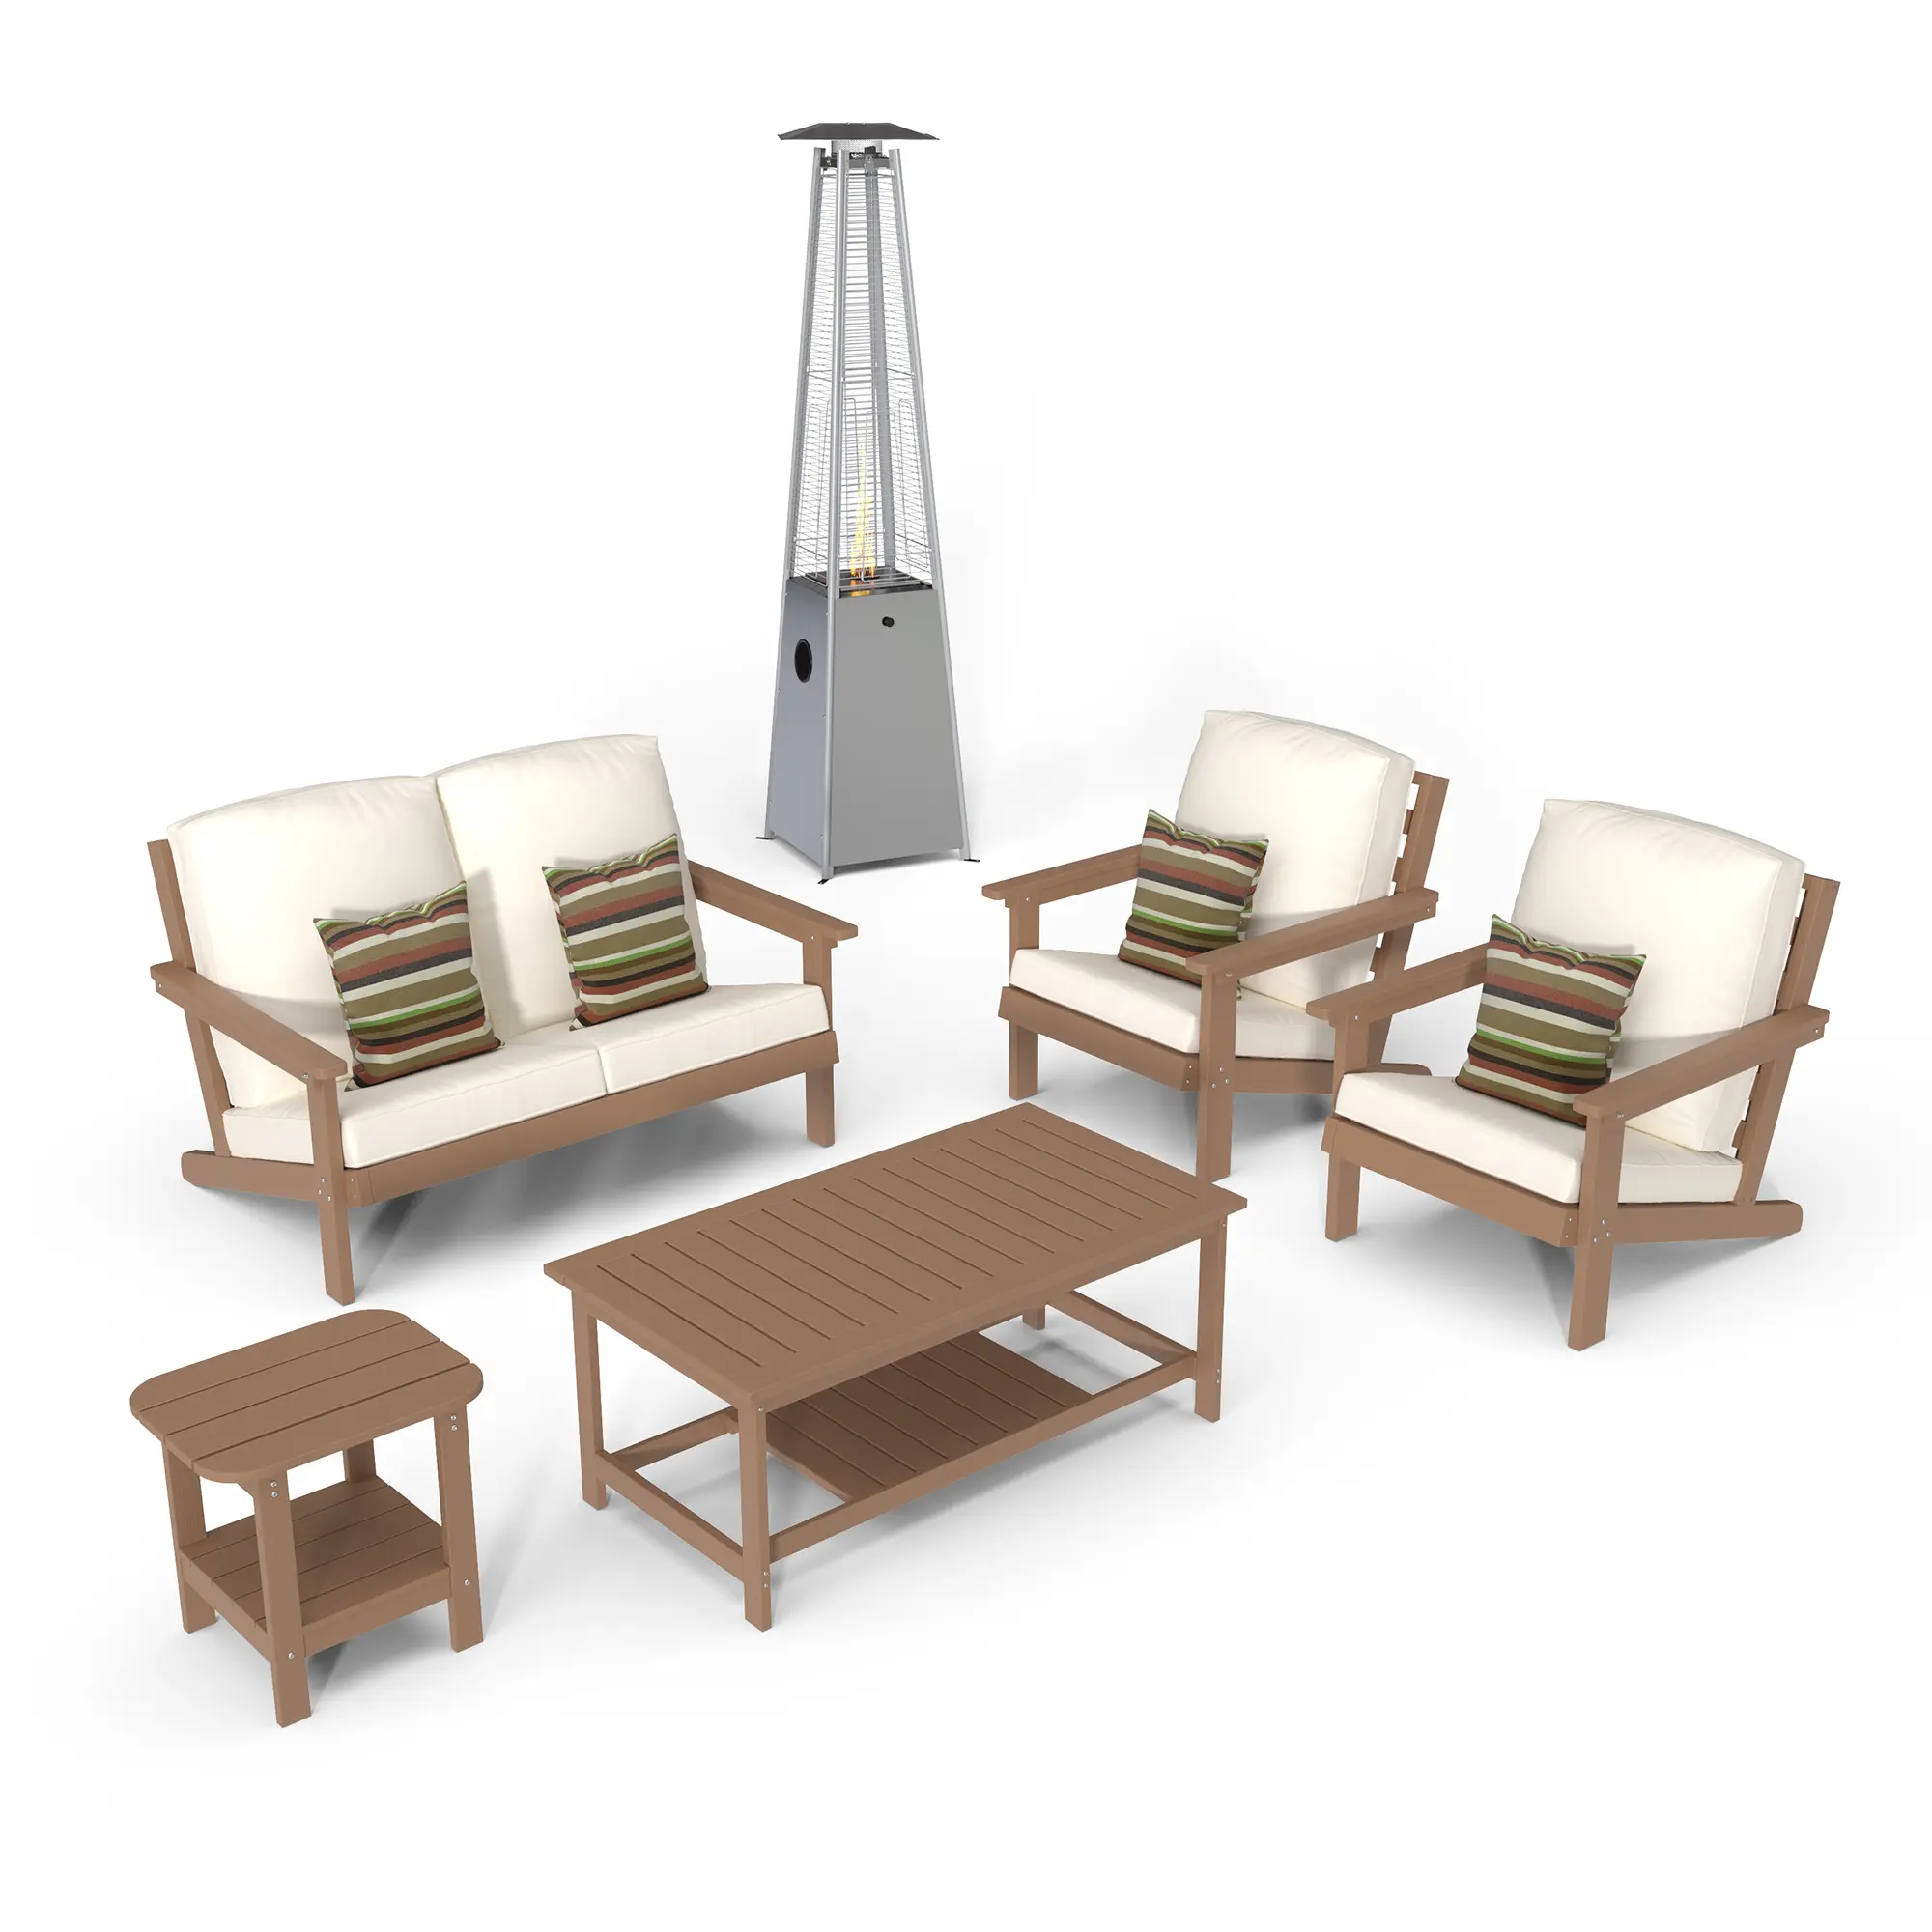 6-Piece Patio Furniture Set with Patio Lounge Chairs and Gas Propane Heater